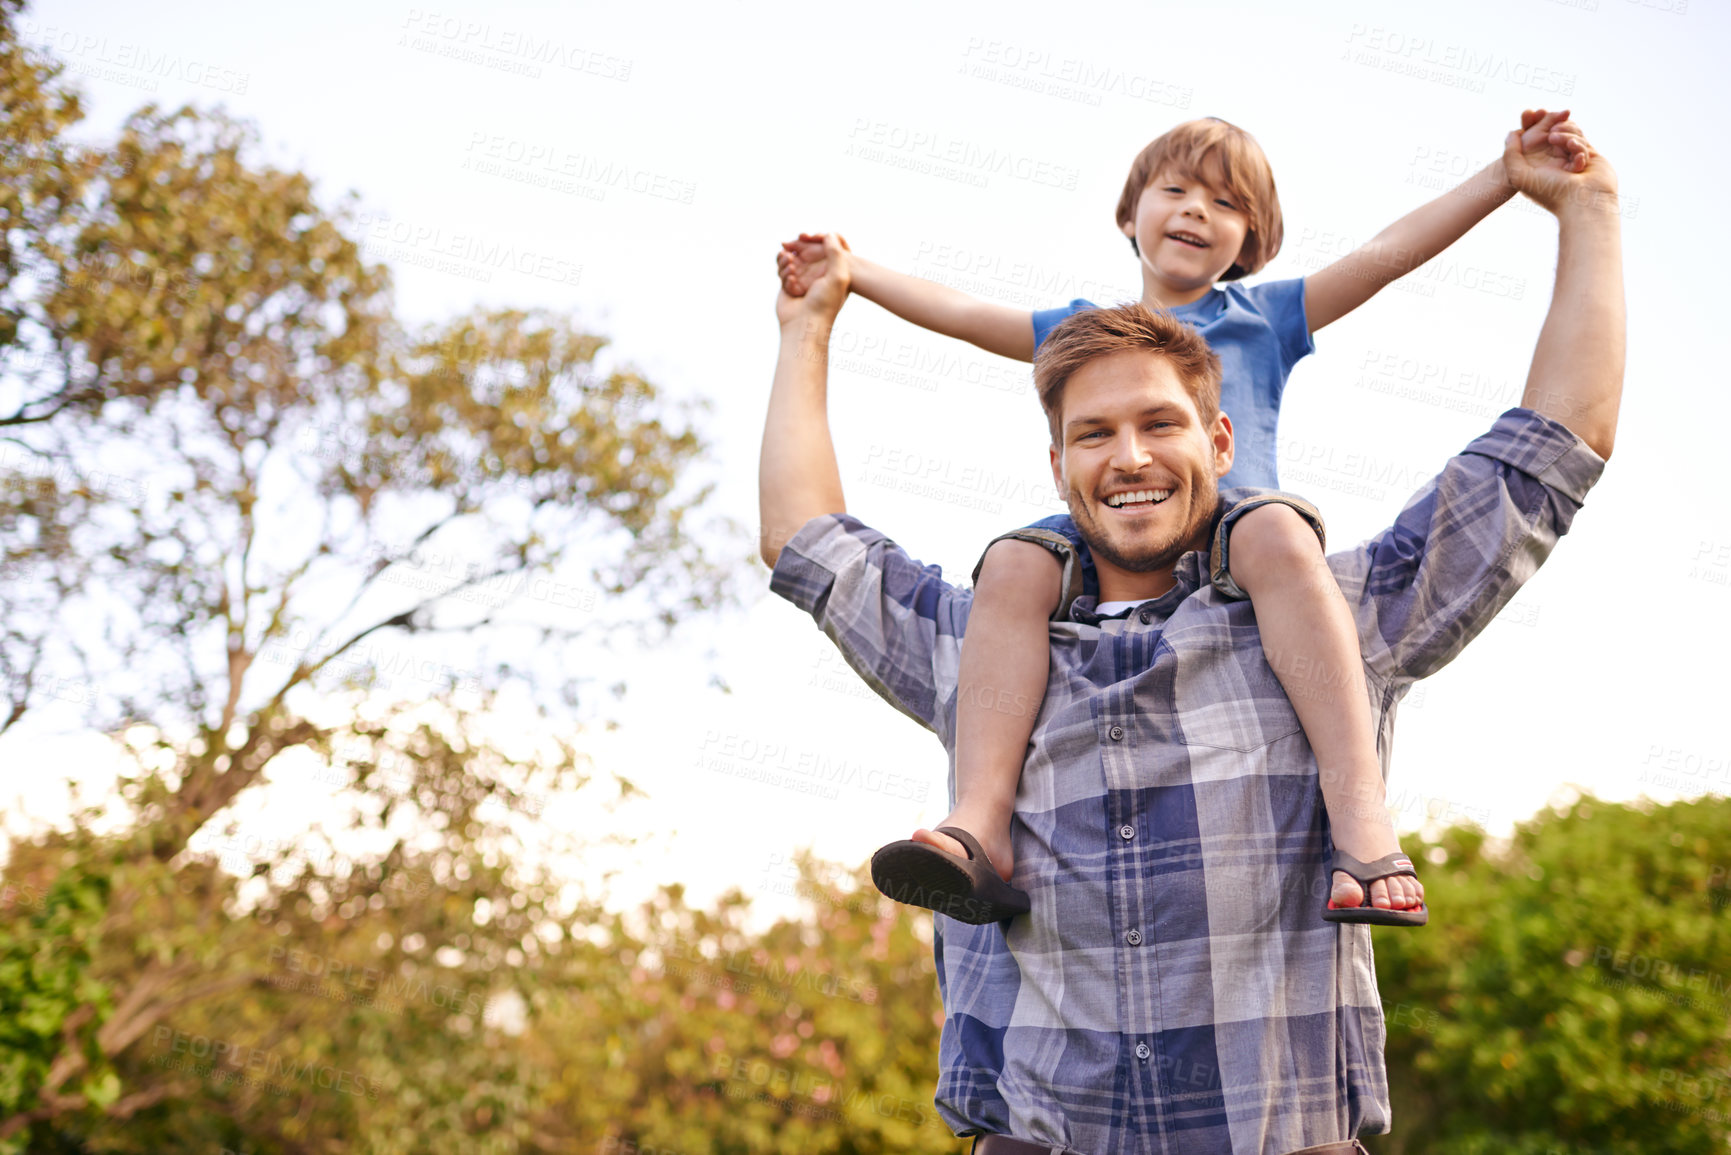 Buy stock photo Smile, nature and child on father shoulders in outdoor park or field for playing together. Happy, bonding and portrait of excited young dad carrying boy kid for fun in garden in Canada for summer.